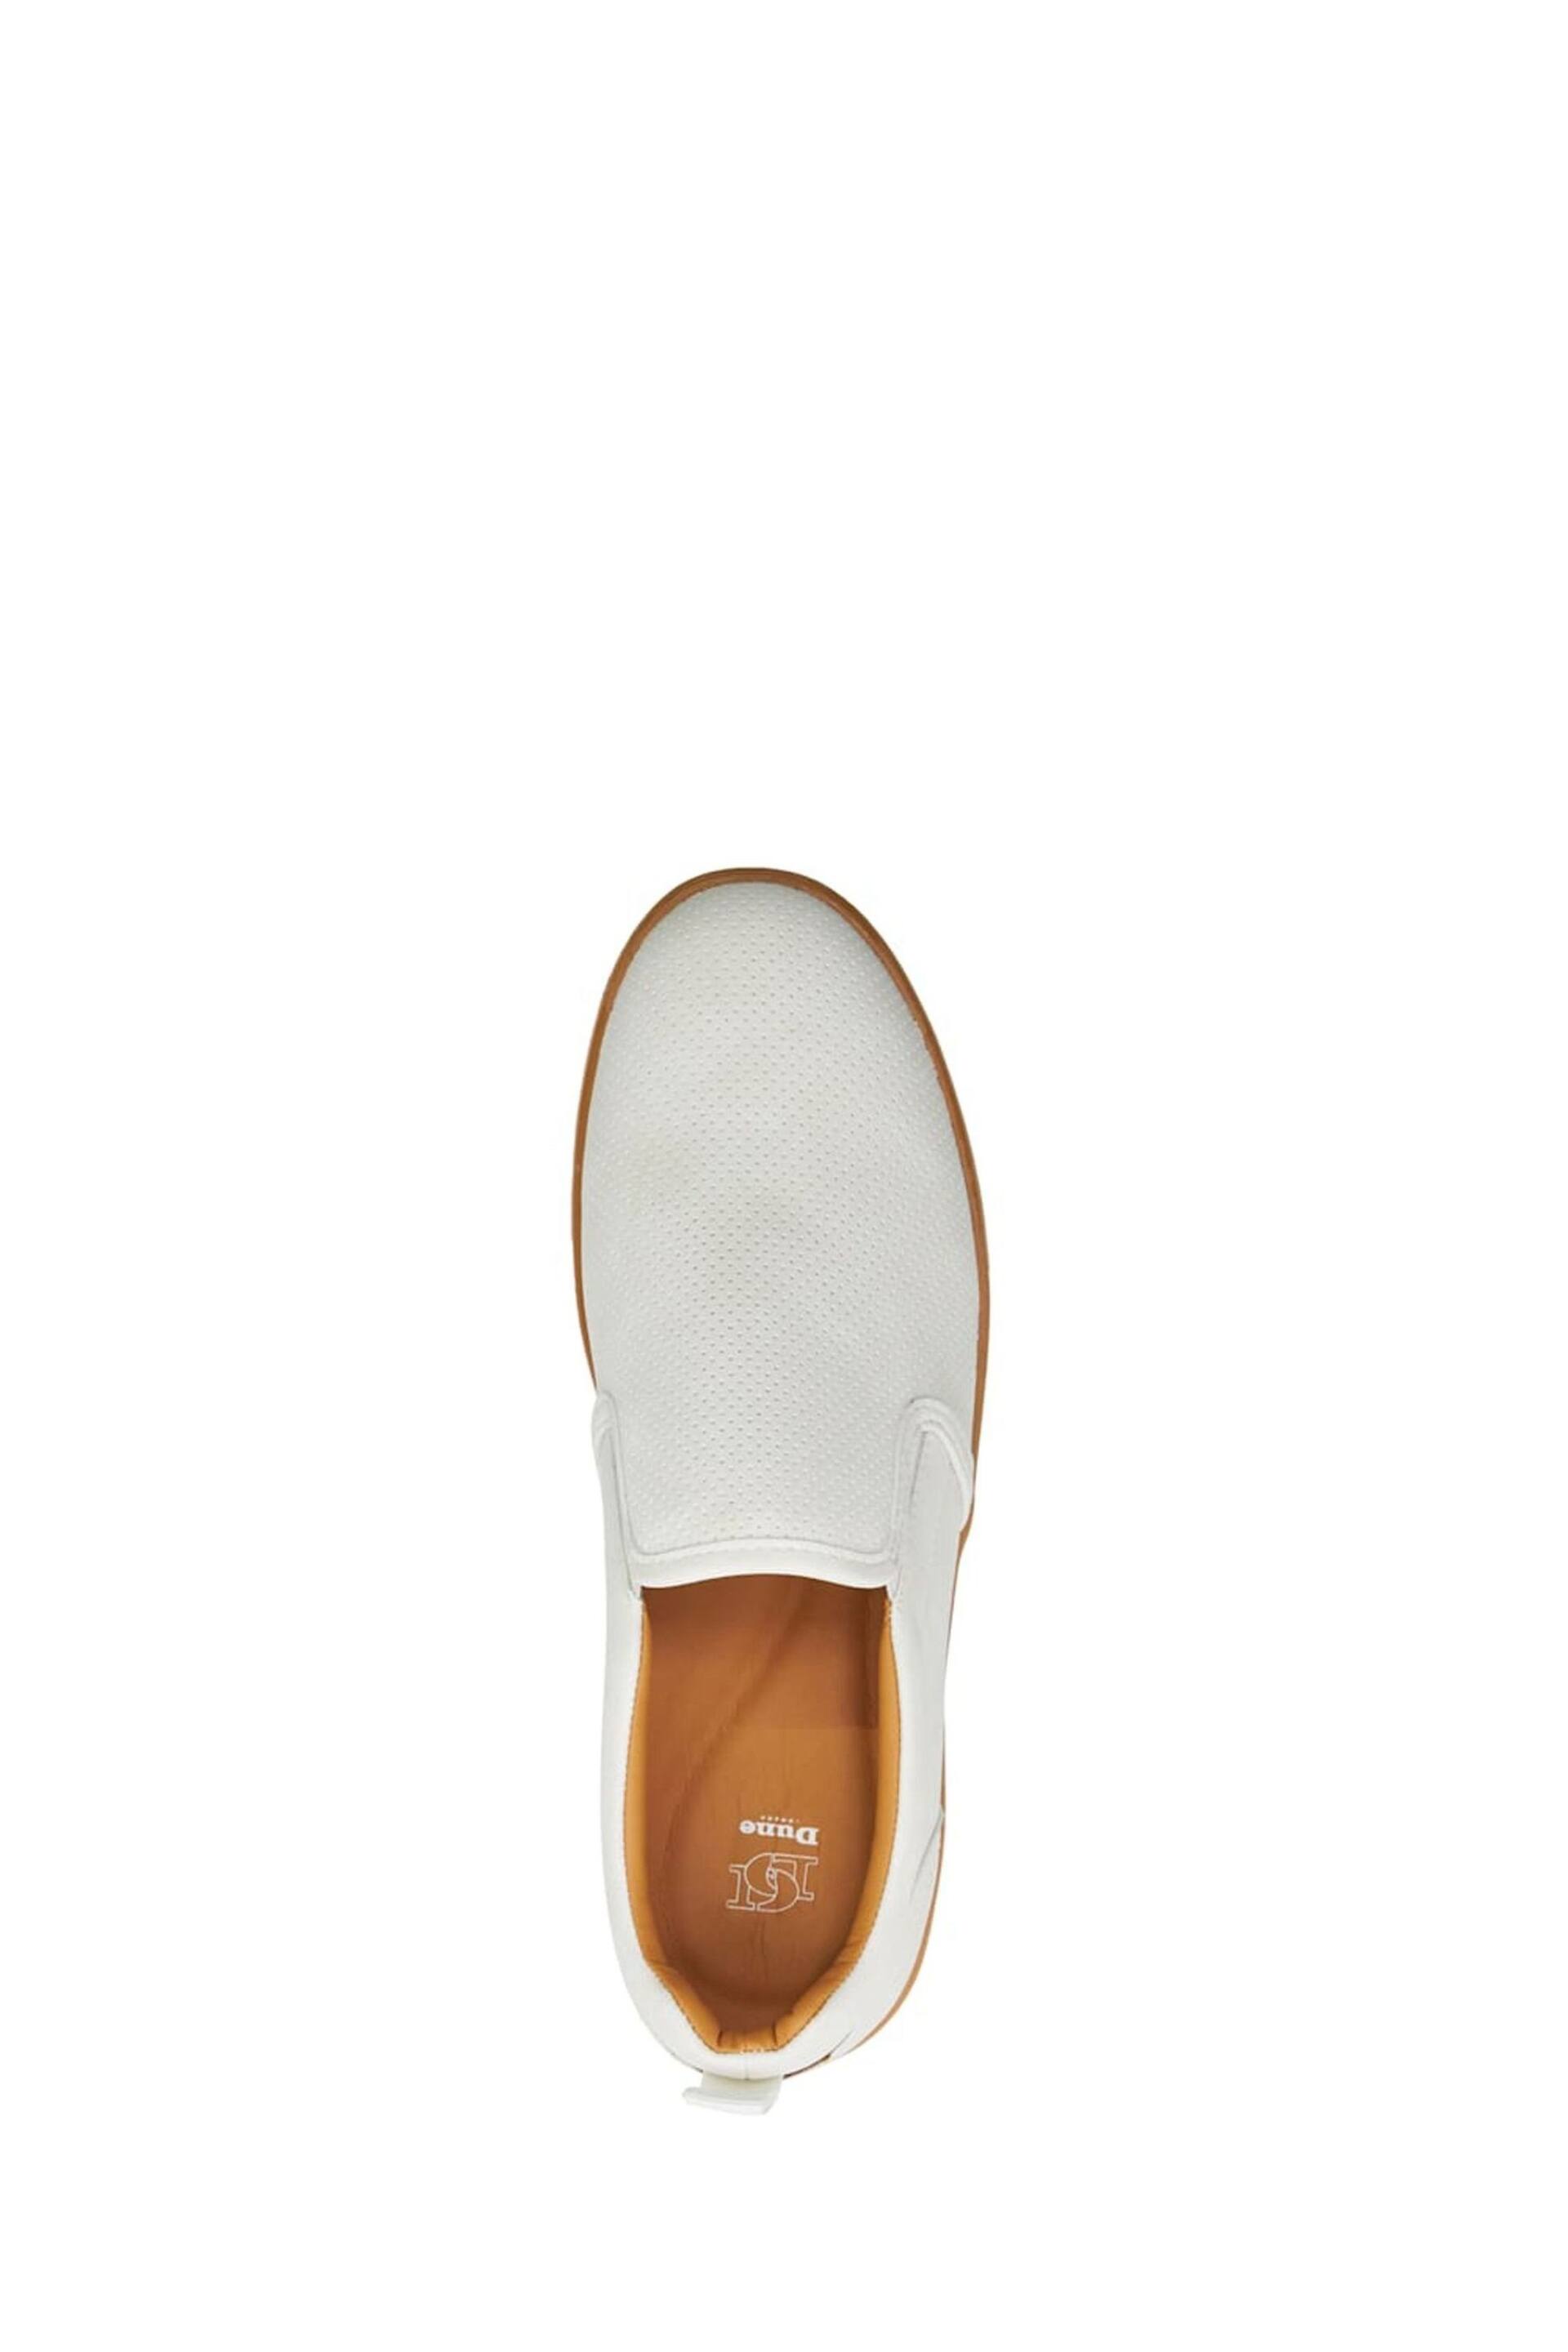 Dune London White Totals Perforated Slip-On Trainers - Image 6 of 6